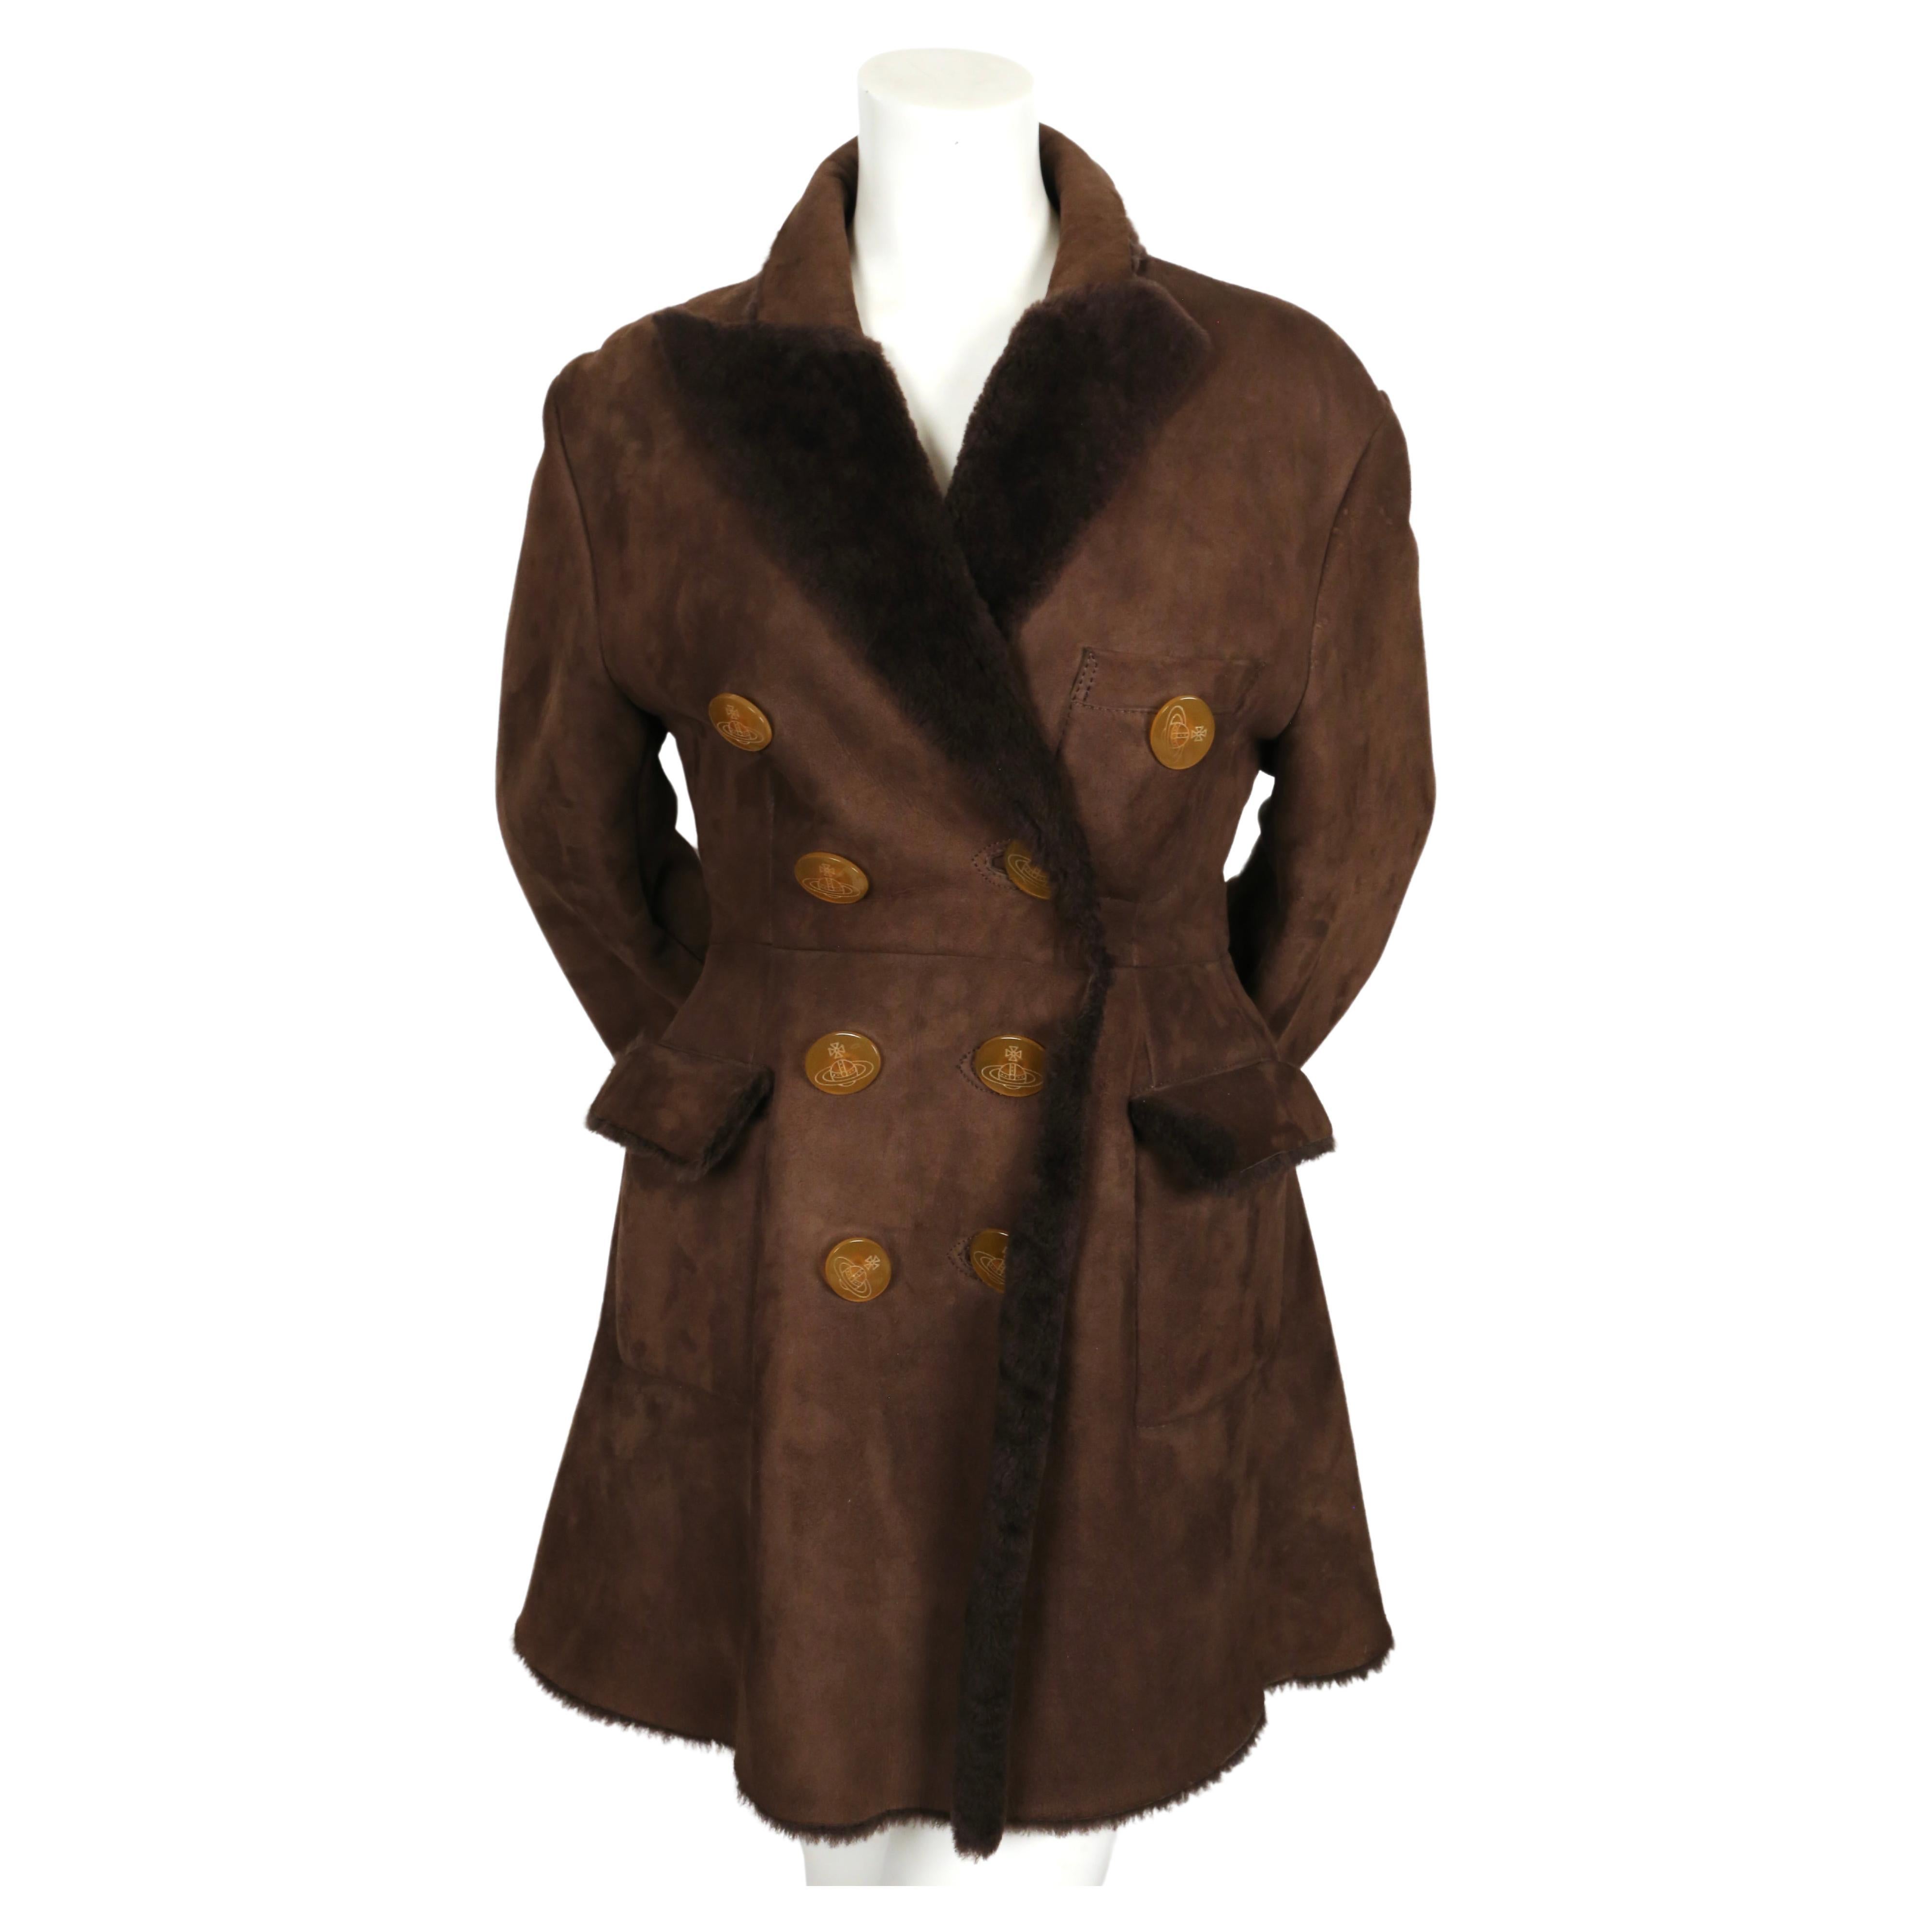 Rich, brown shearling coat with signature orb buttons designed by Vivienne Westwood dating to the mid 1990's.  Coat has a really great silhouette with its tailored 'Victorian' fit and flared back.  Coat is labeled an Italian size '44', however it